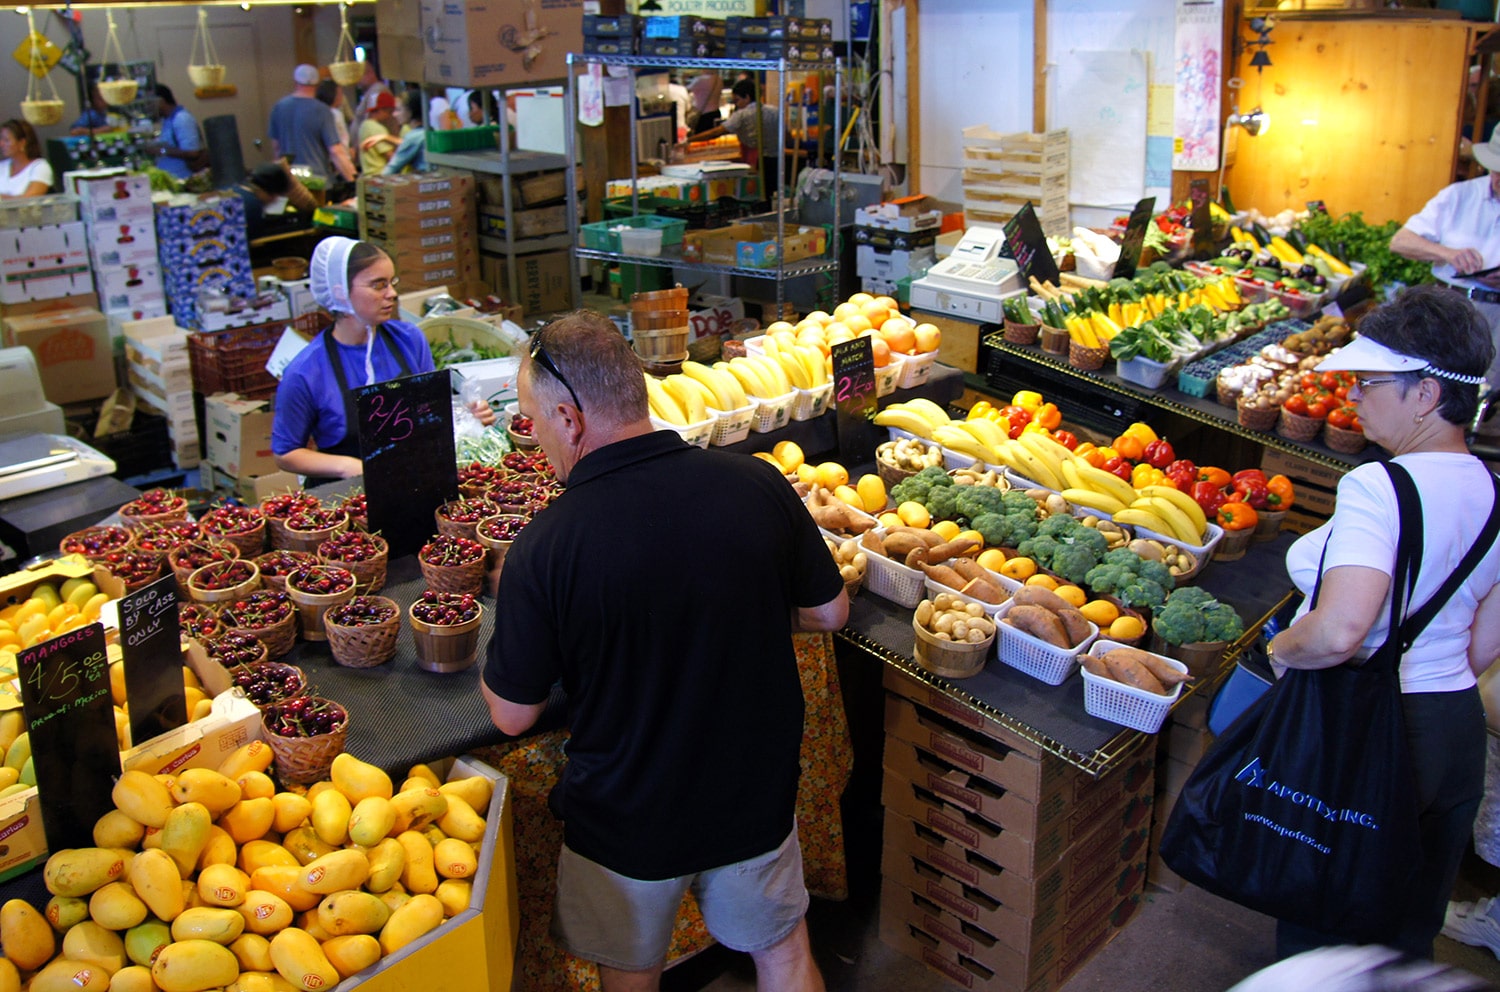 People shopping for vegatables at a local market in New York, USA.